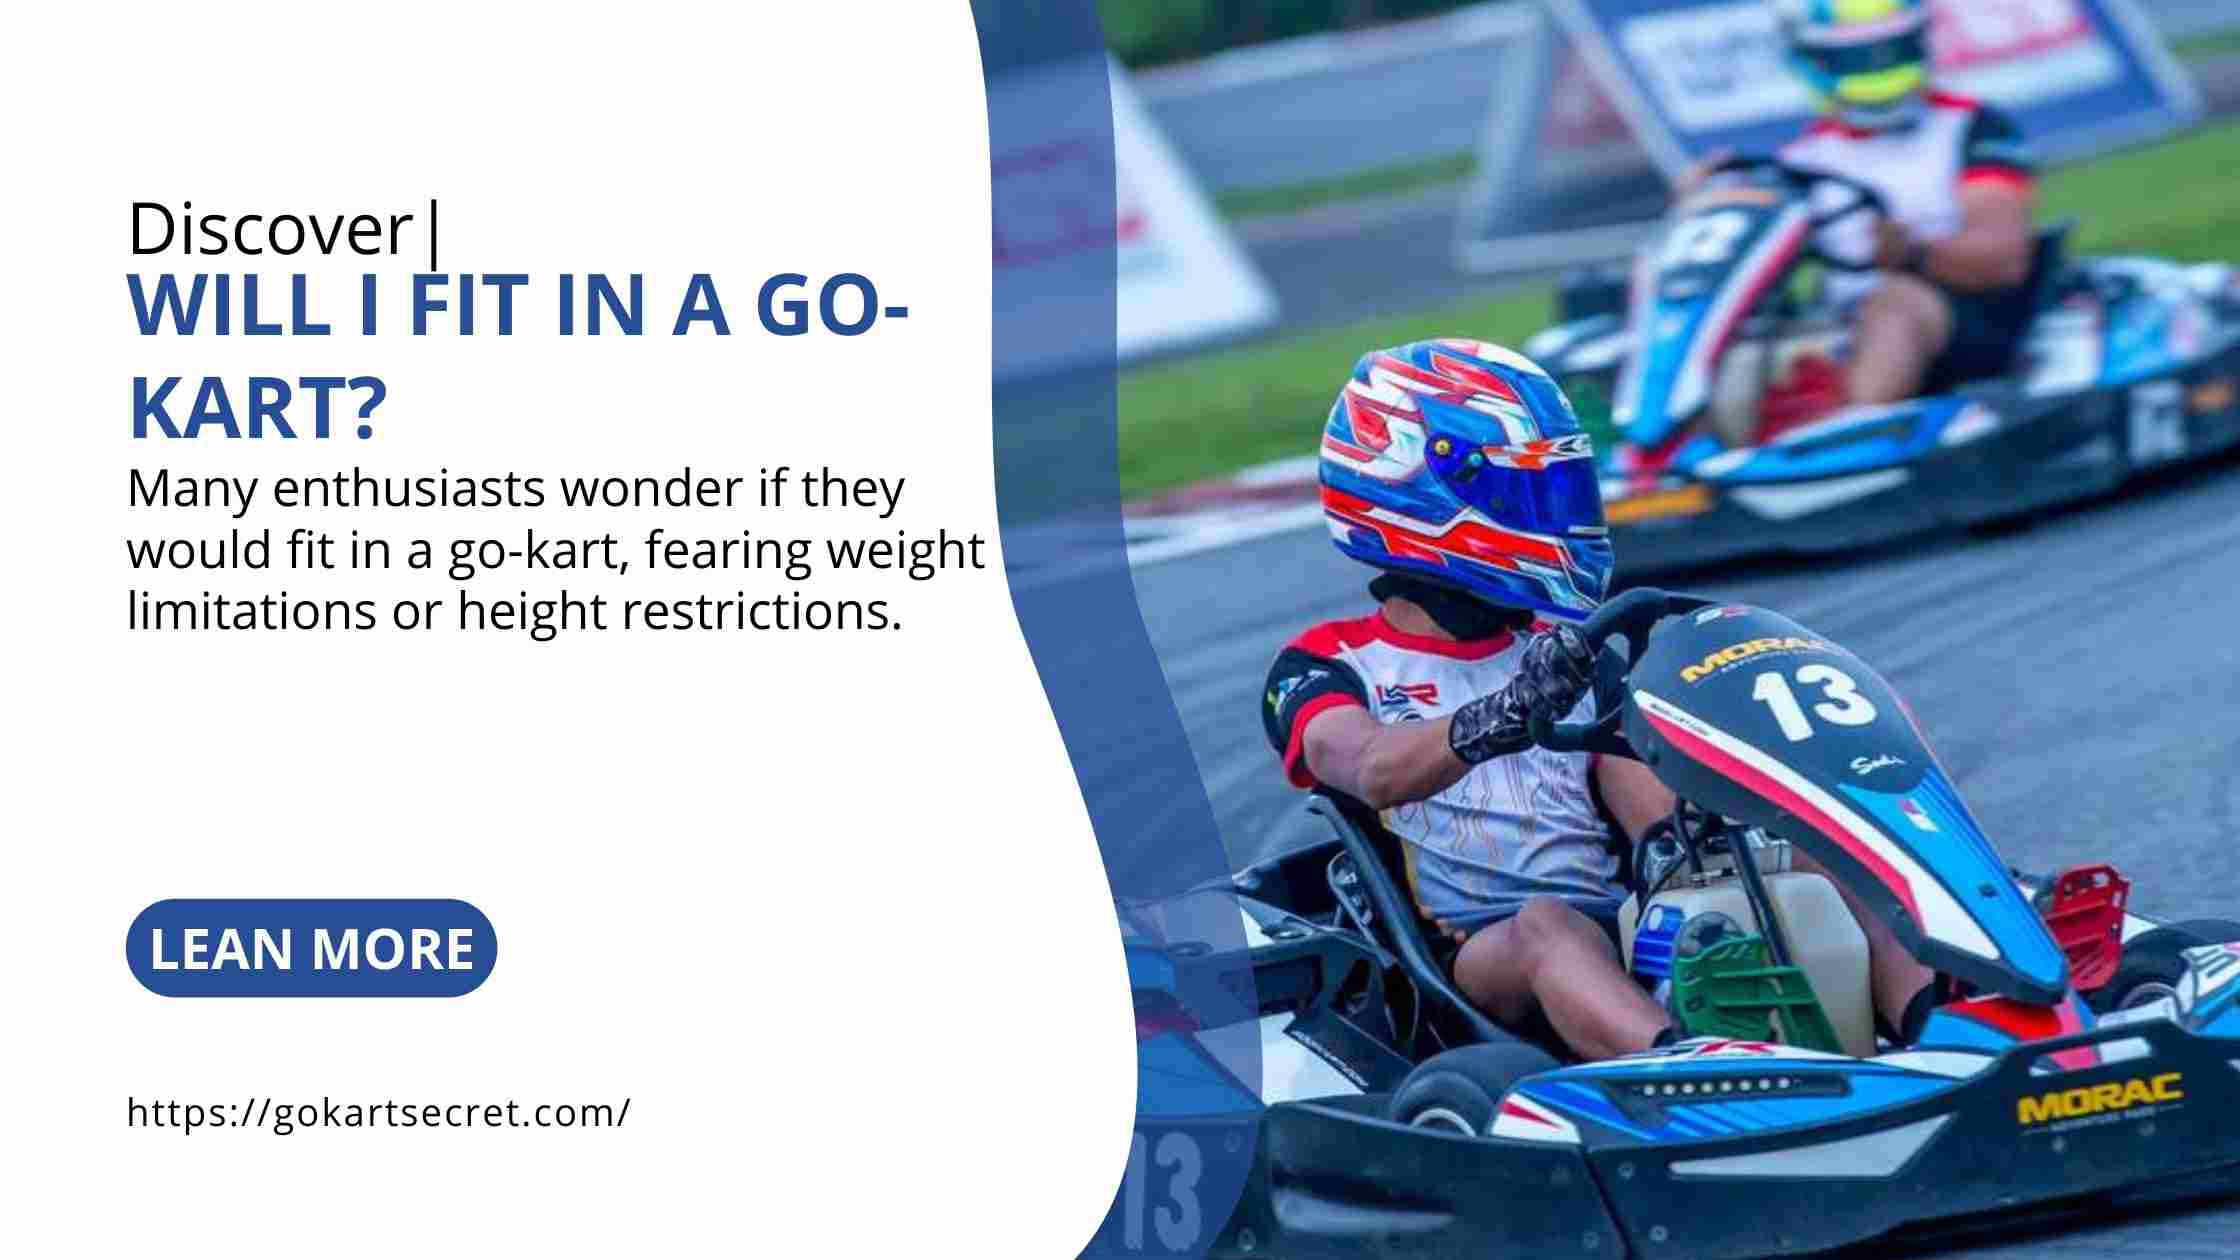 Will I Fit In a Go-Kart?